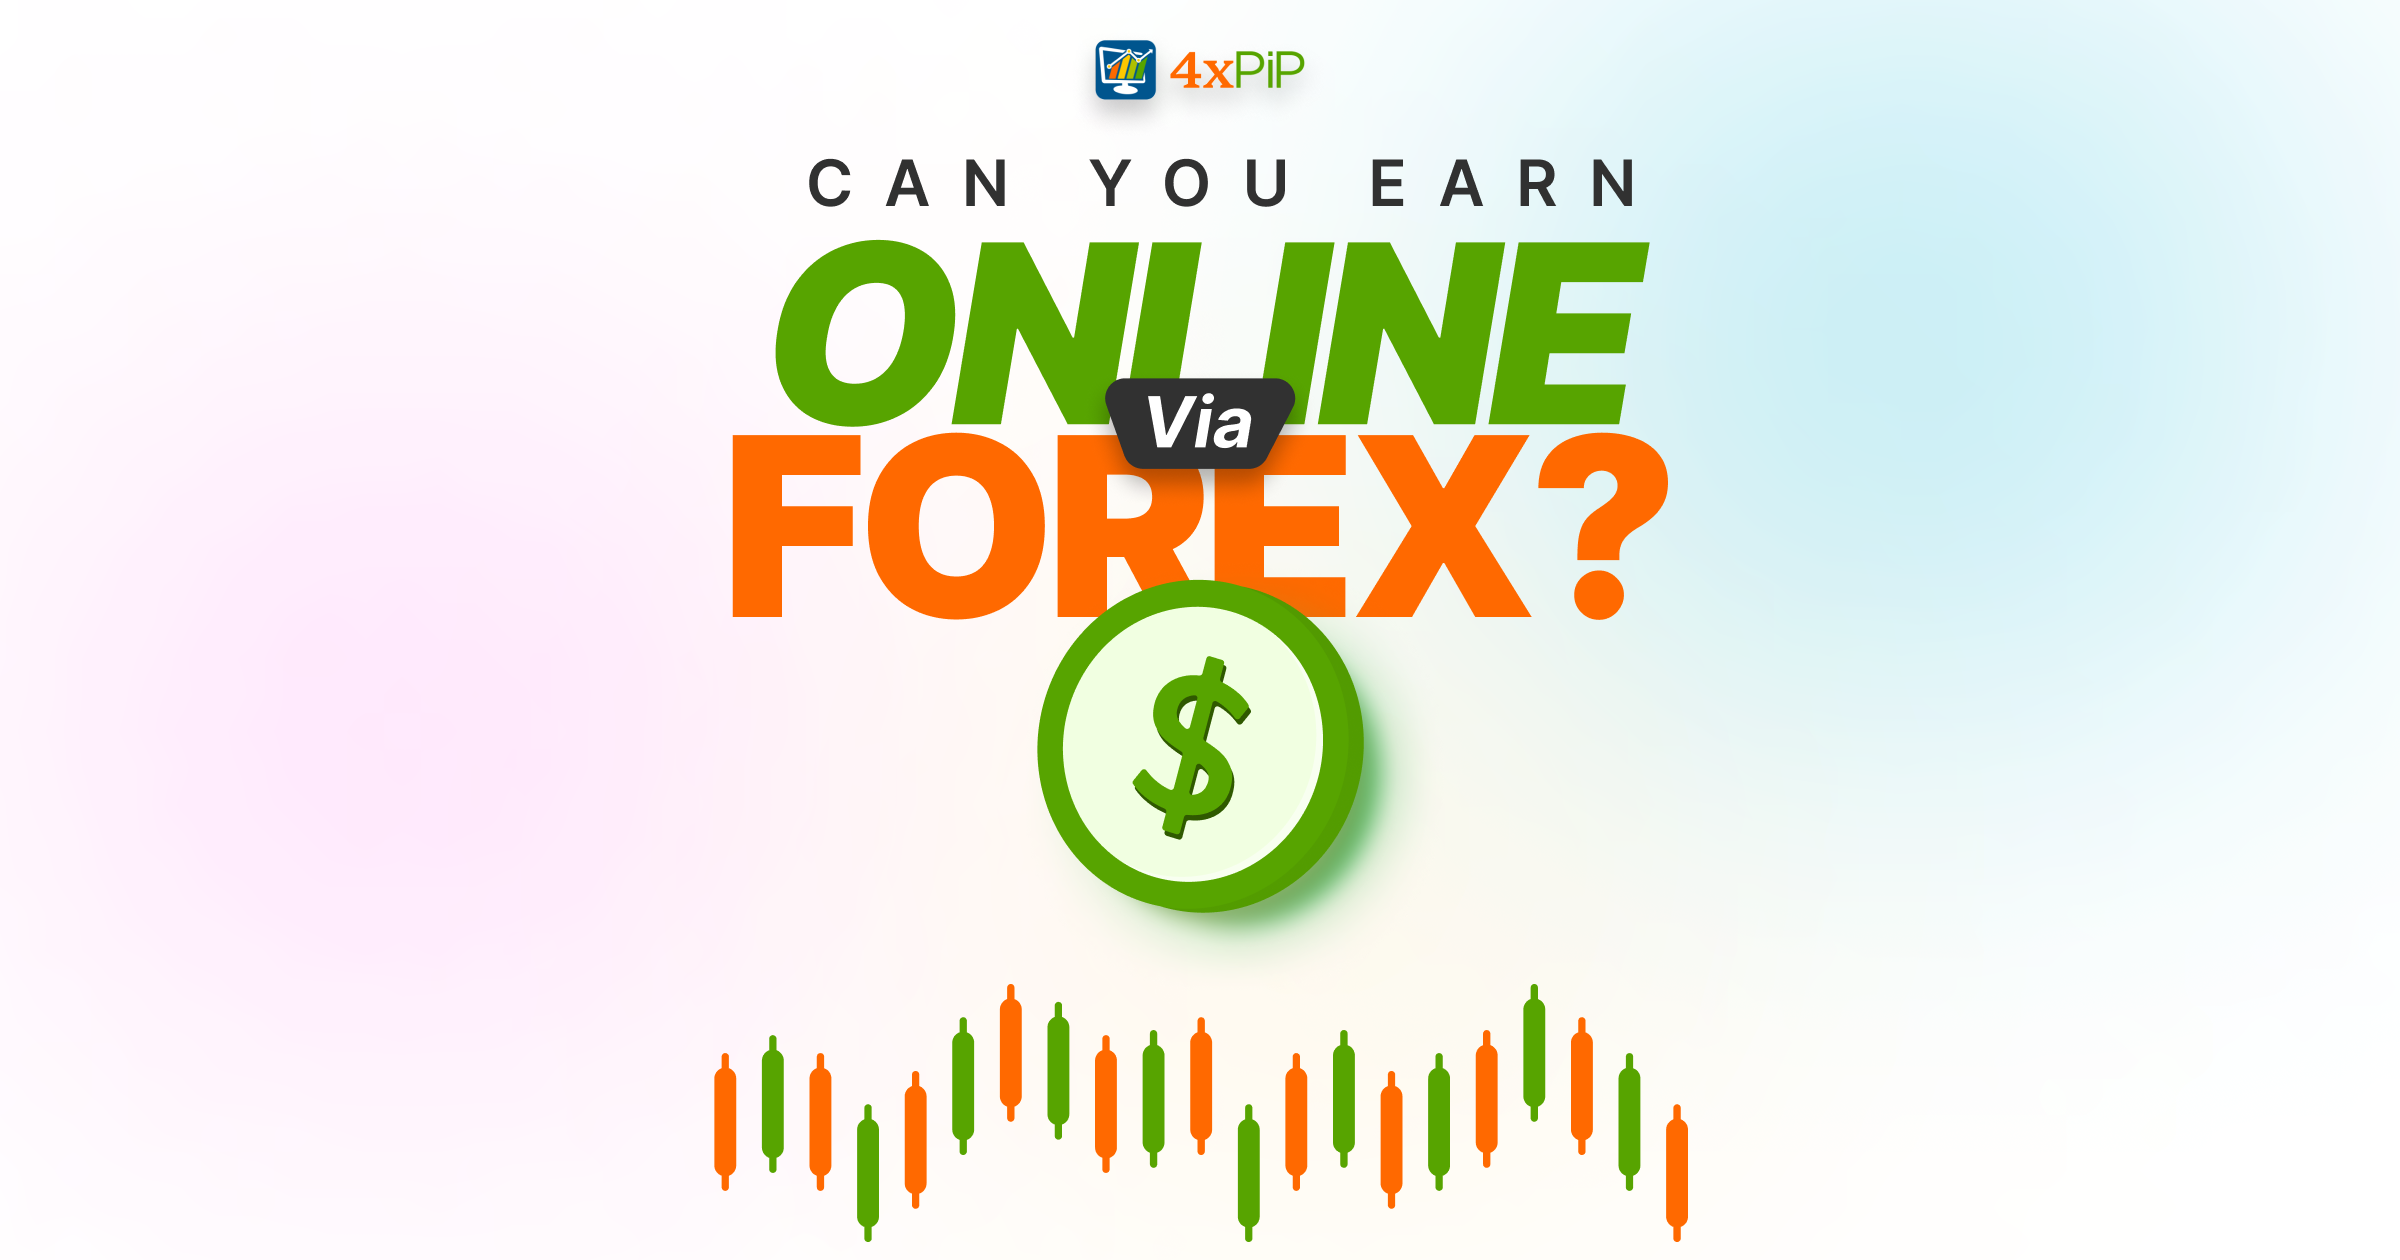 Can we earn online via Forex